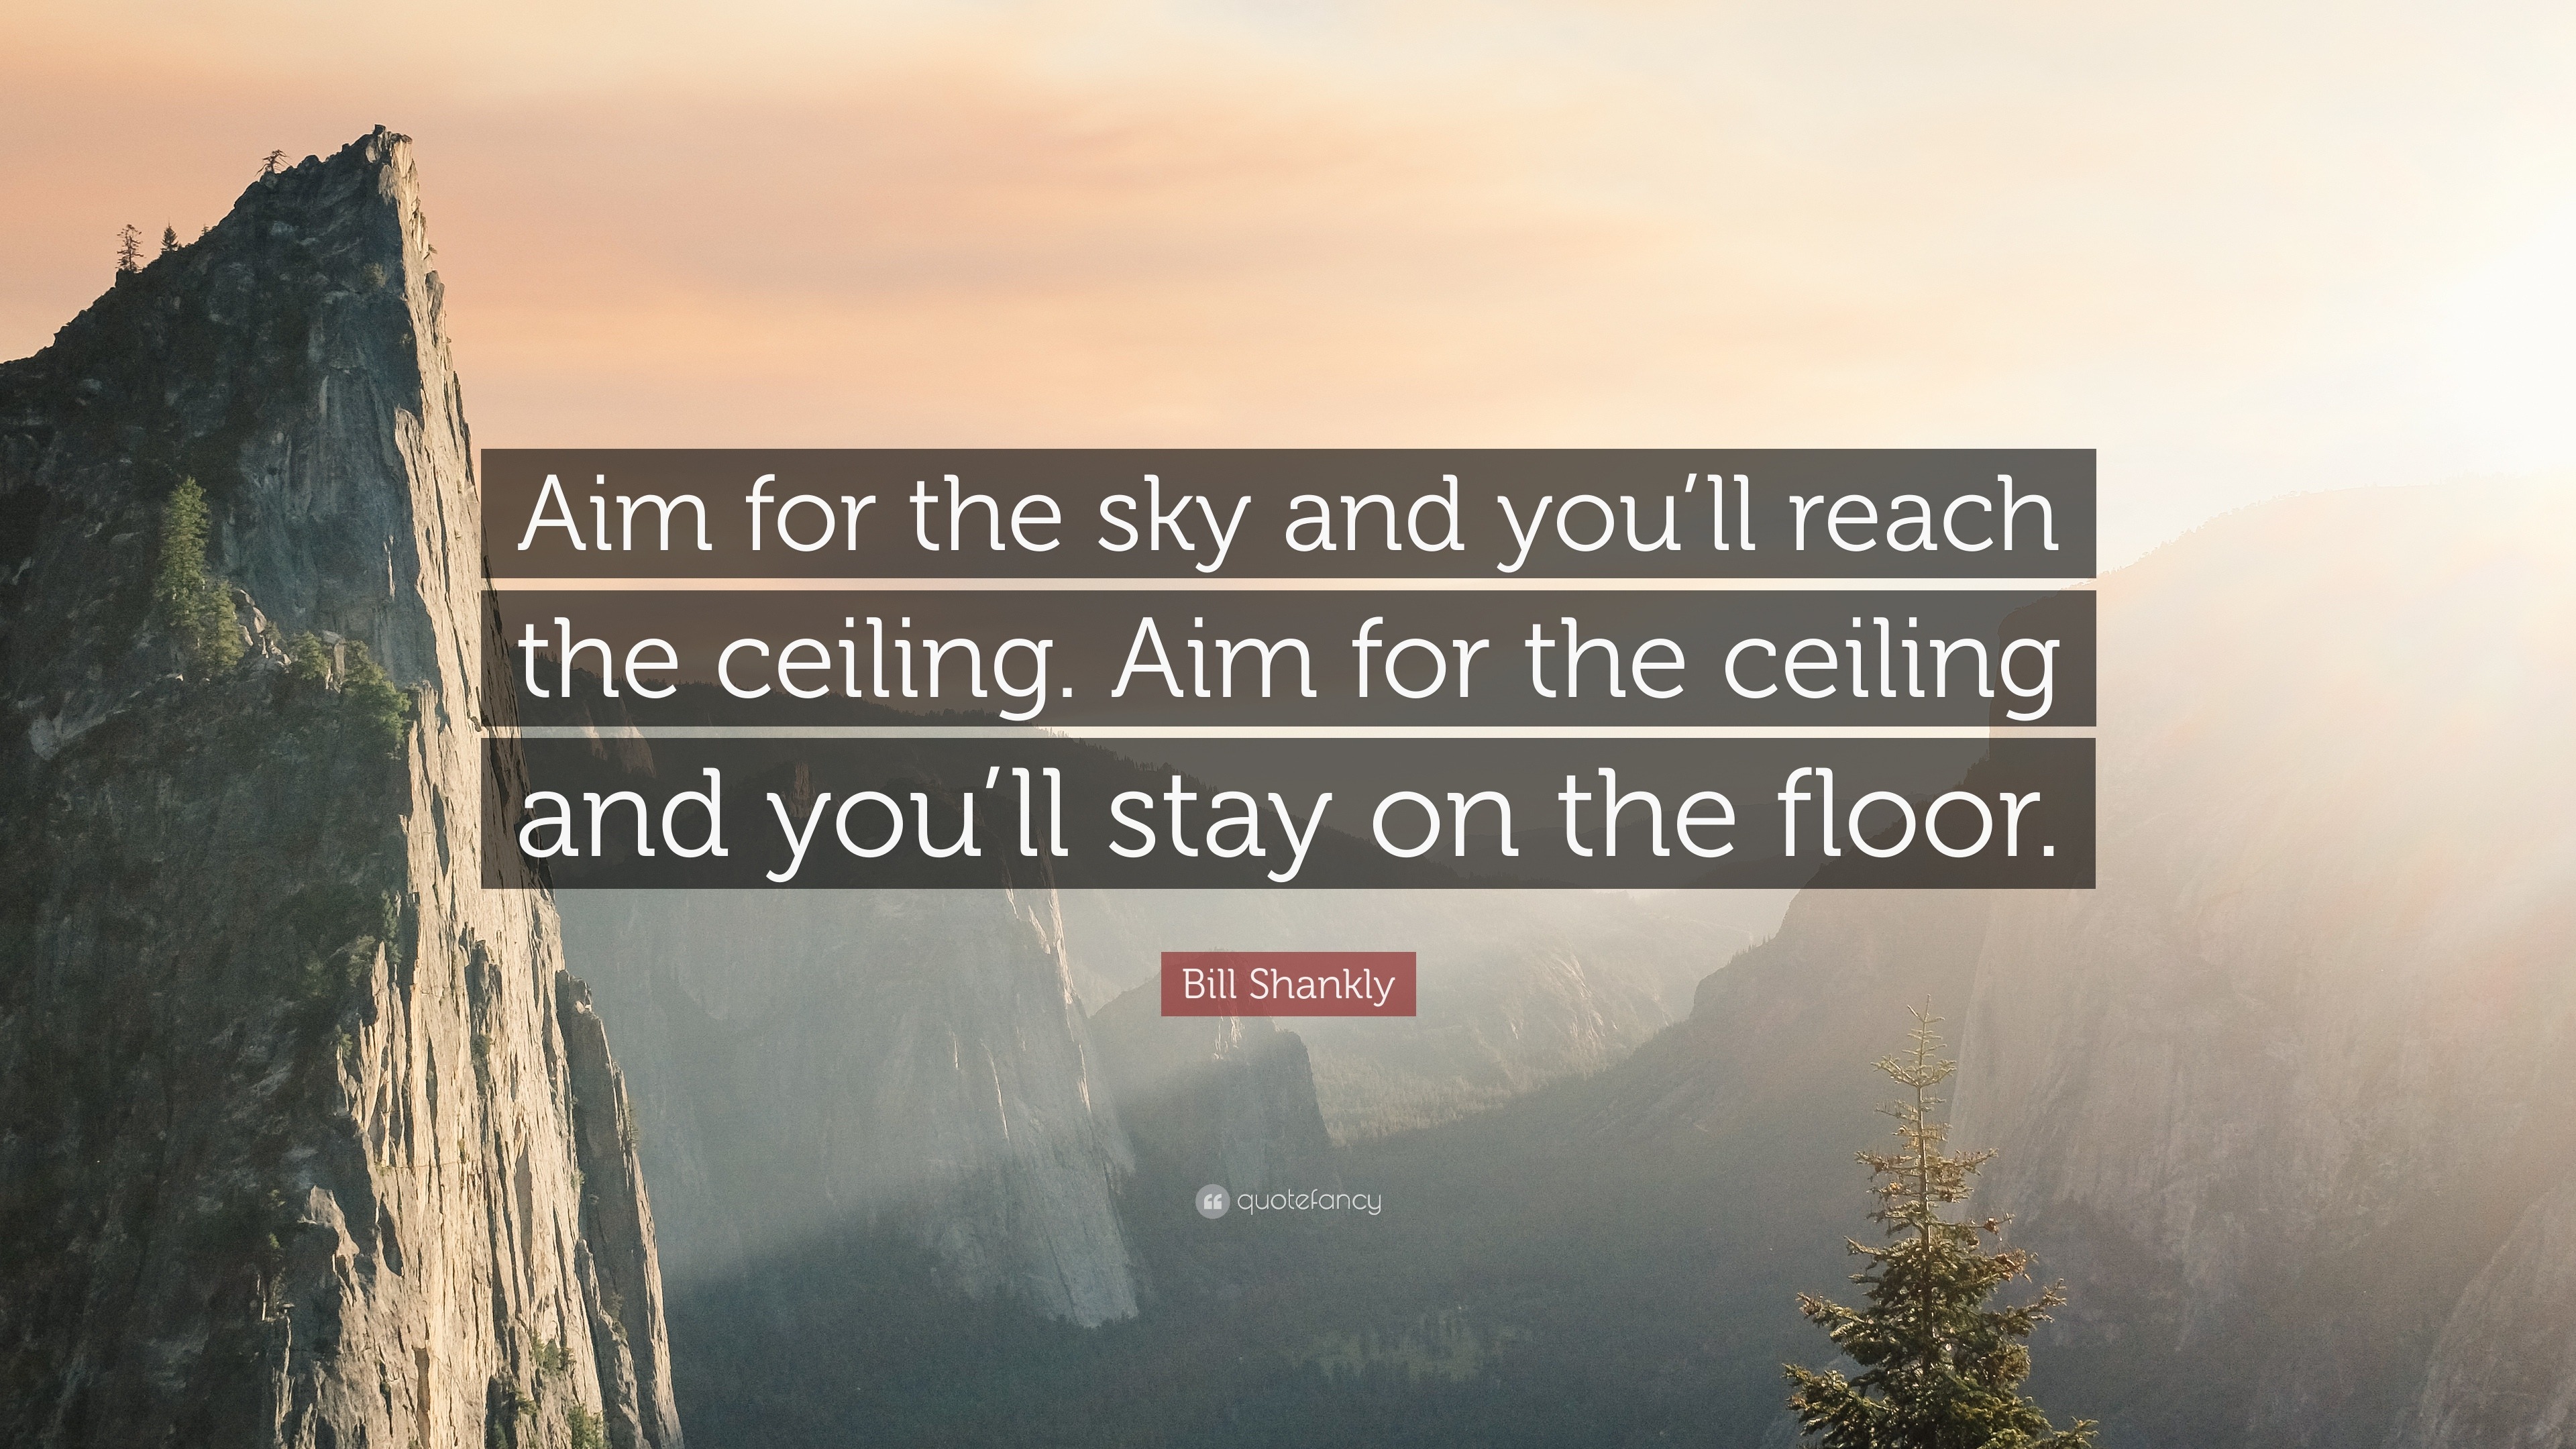 Bill Shankly Quote Aim For The Sky And You Ll Reach The Ceiling Aim For The